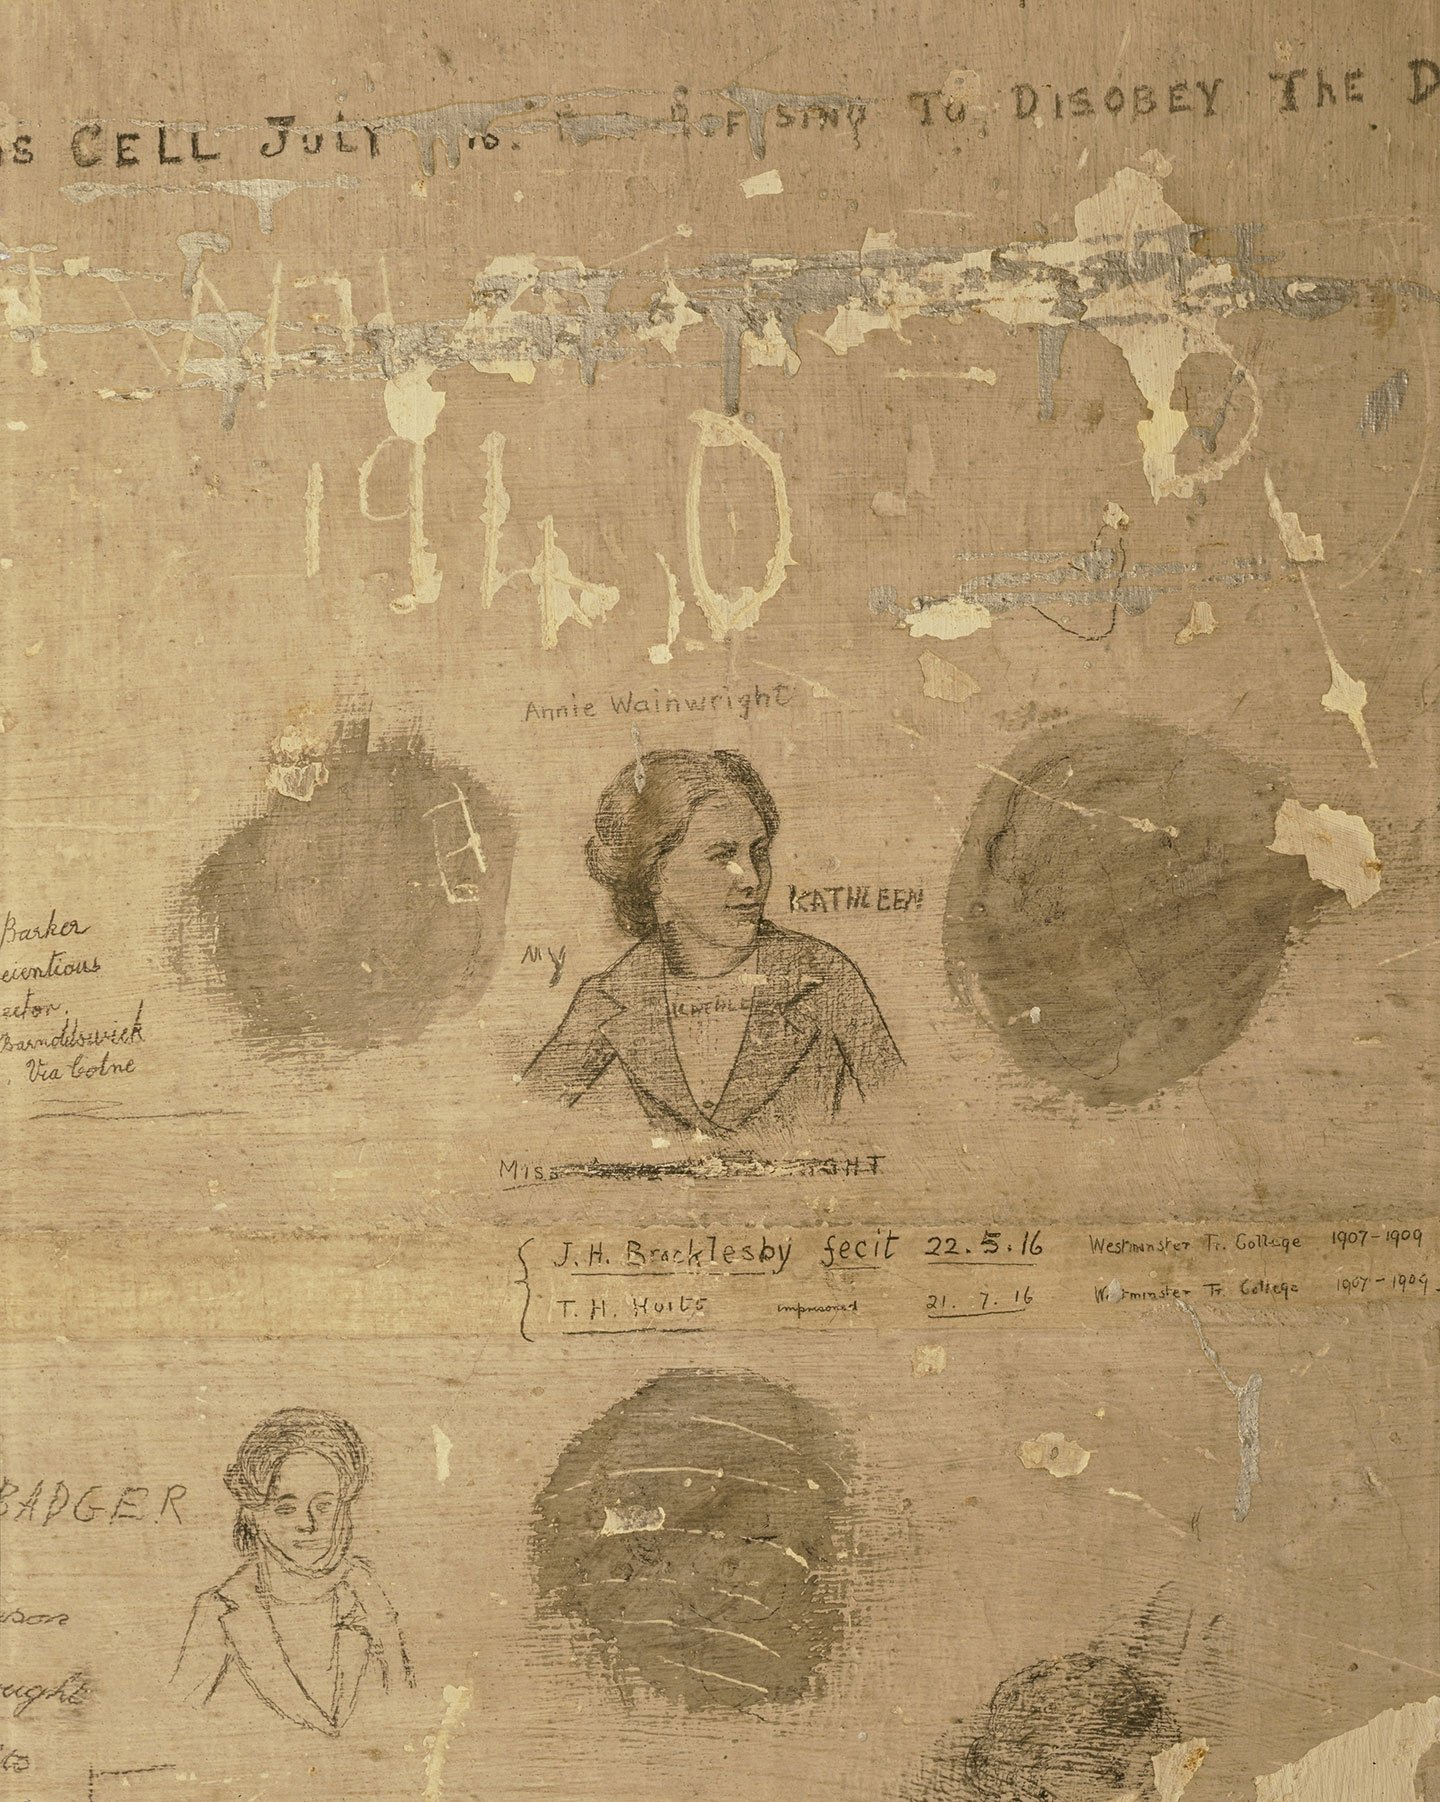 Detail of pencil drawings and inscriptions made by conscientious objectors held in the cell block at Richmond Castle, Yorkshire, in 1916